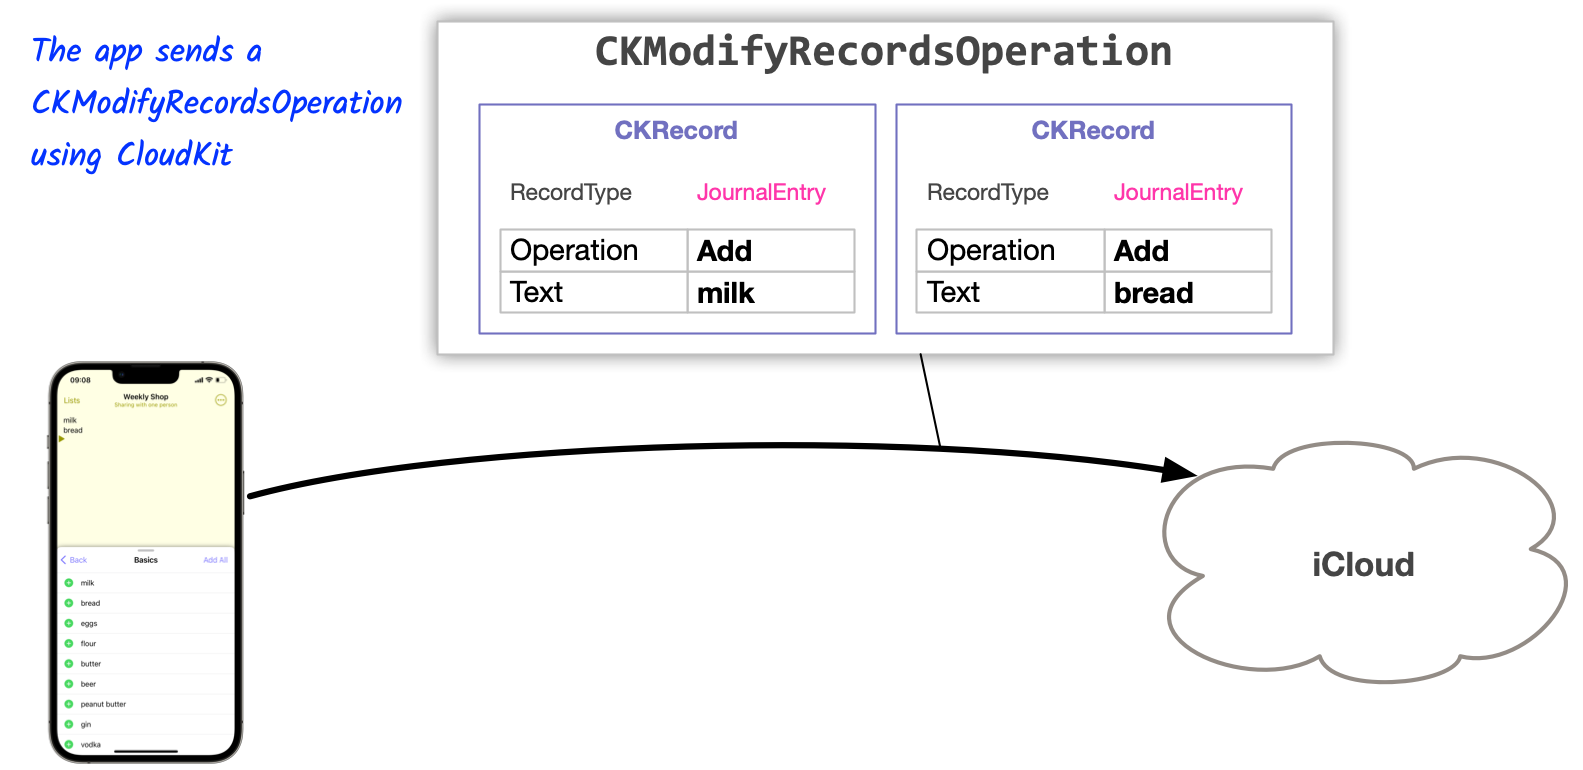 The app creates a CKModifyRecordsOperation and sends it to iCloud using CloudKit